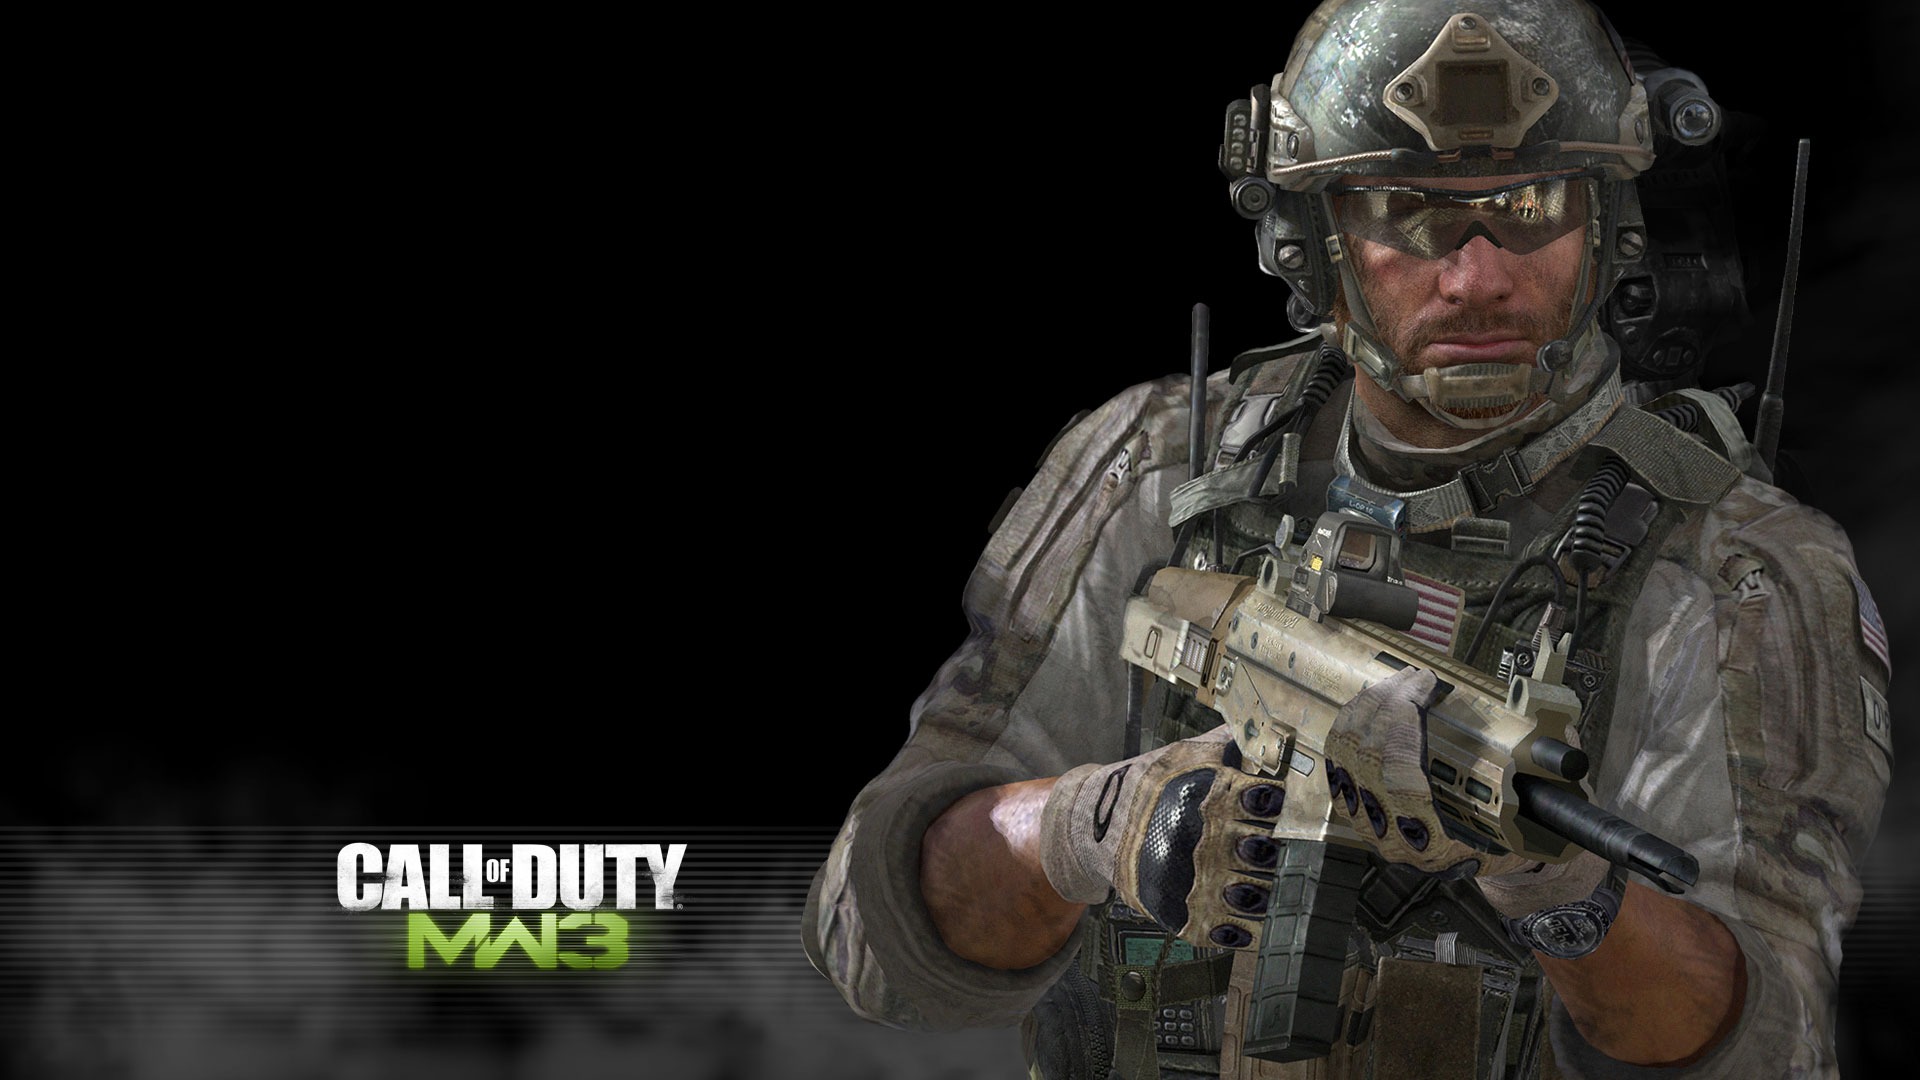 Call of Duty: MW3 HD wallpapers #11 - 1920x1080